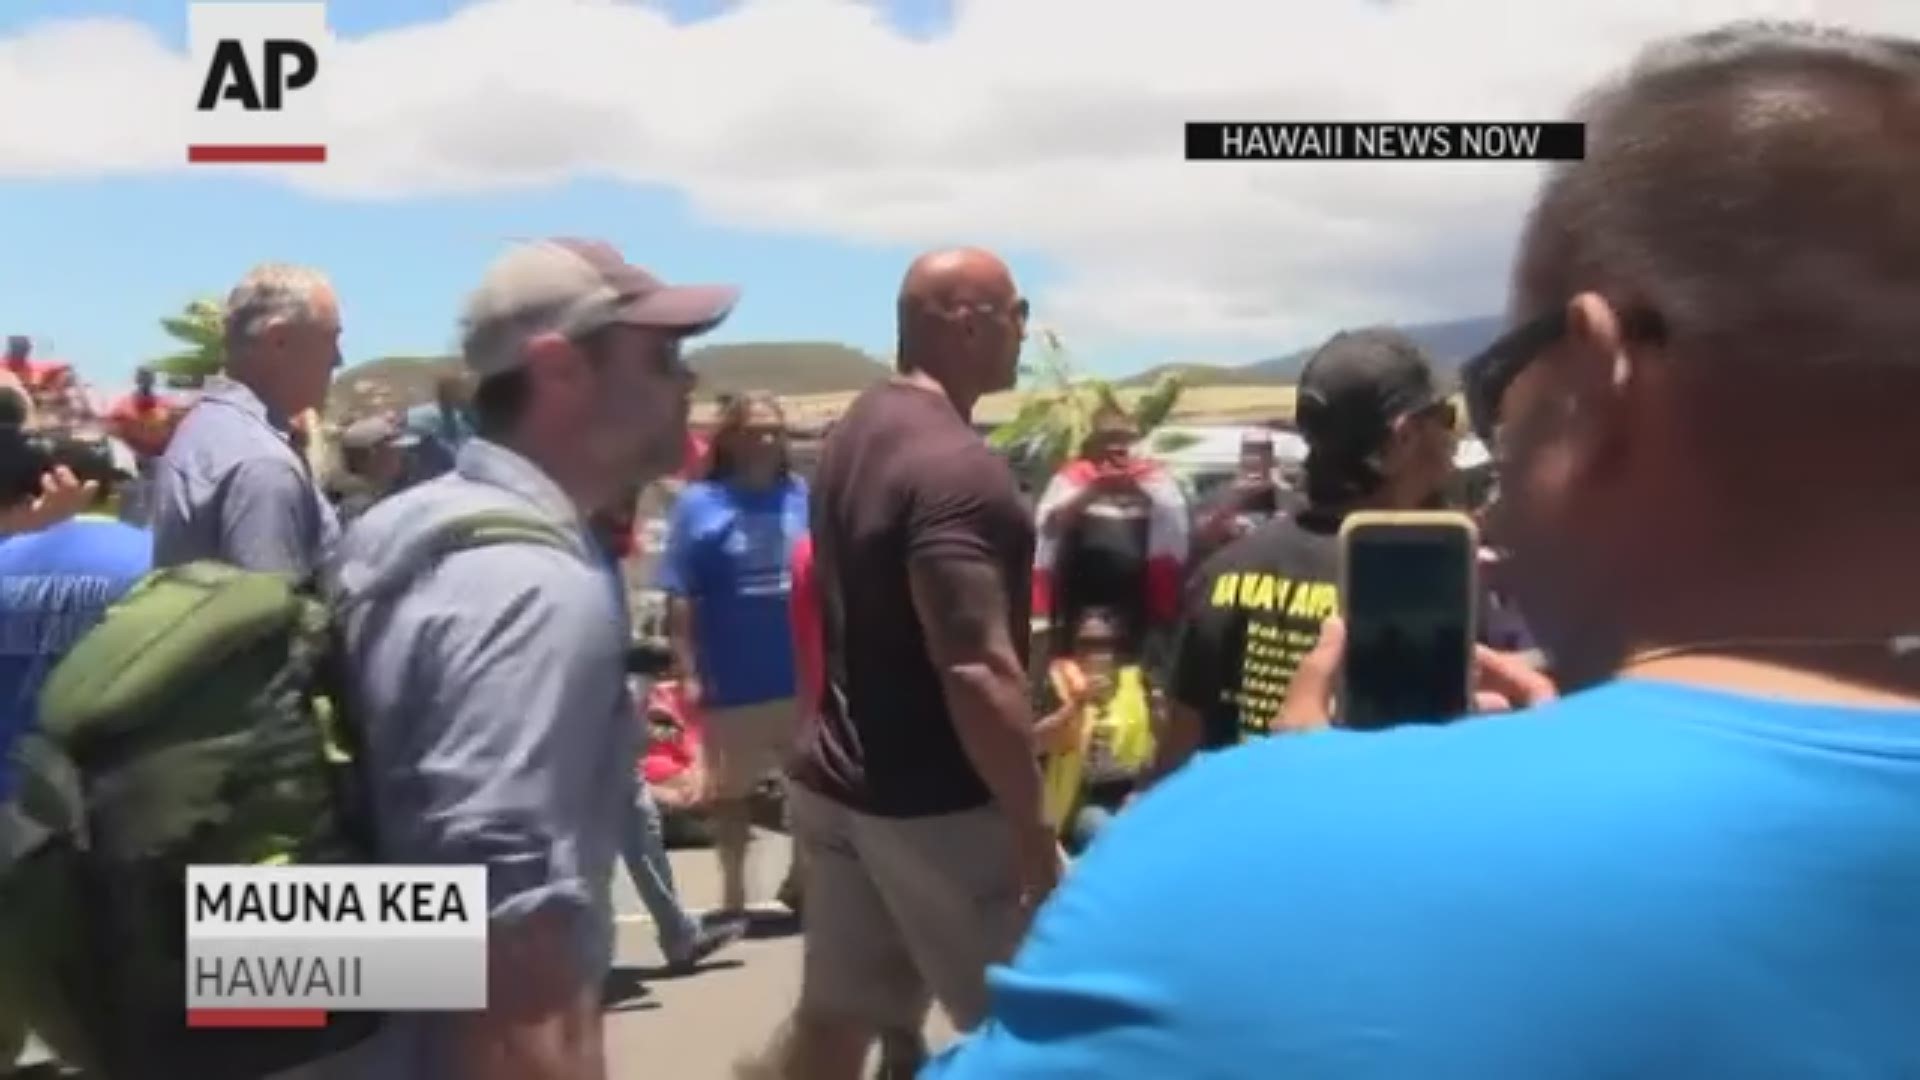 Actor Dwayne "The Rock" Johnson visited protesters blocking construction of a giant telescope on Hawaii's Big Island on Wednesday. (AP)